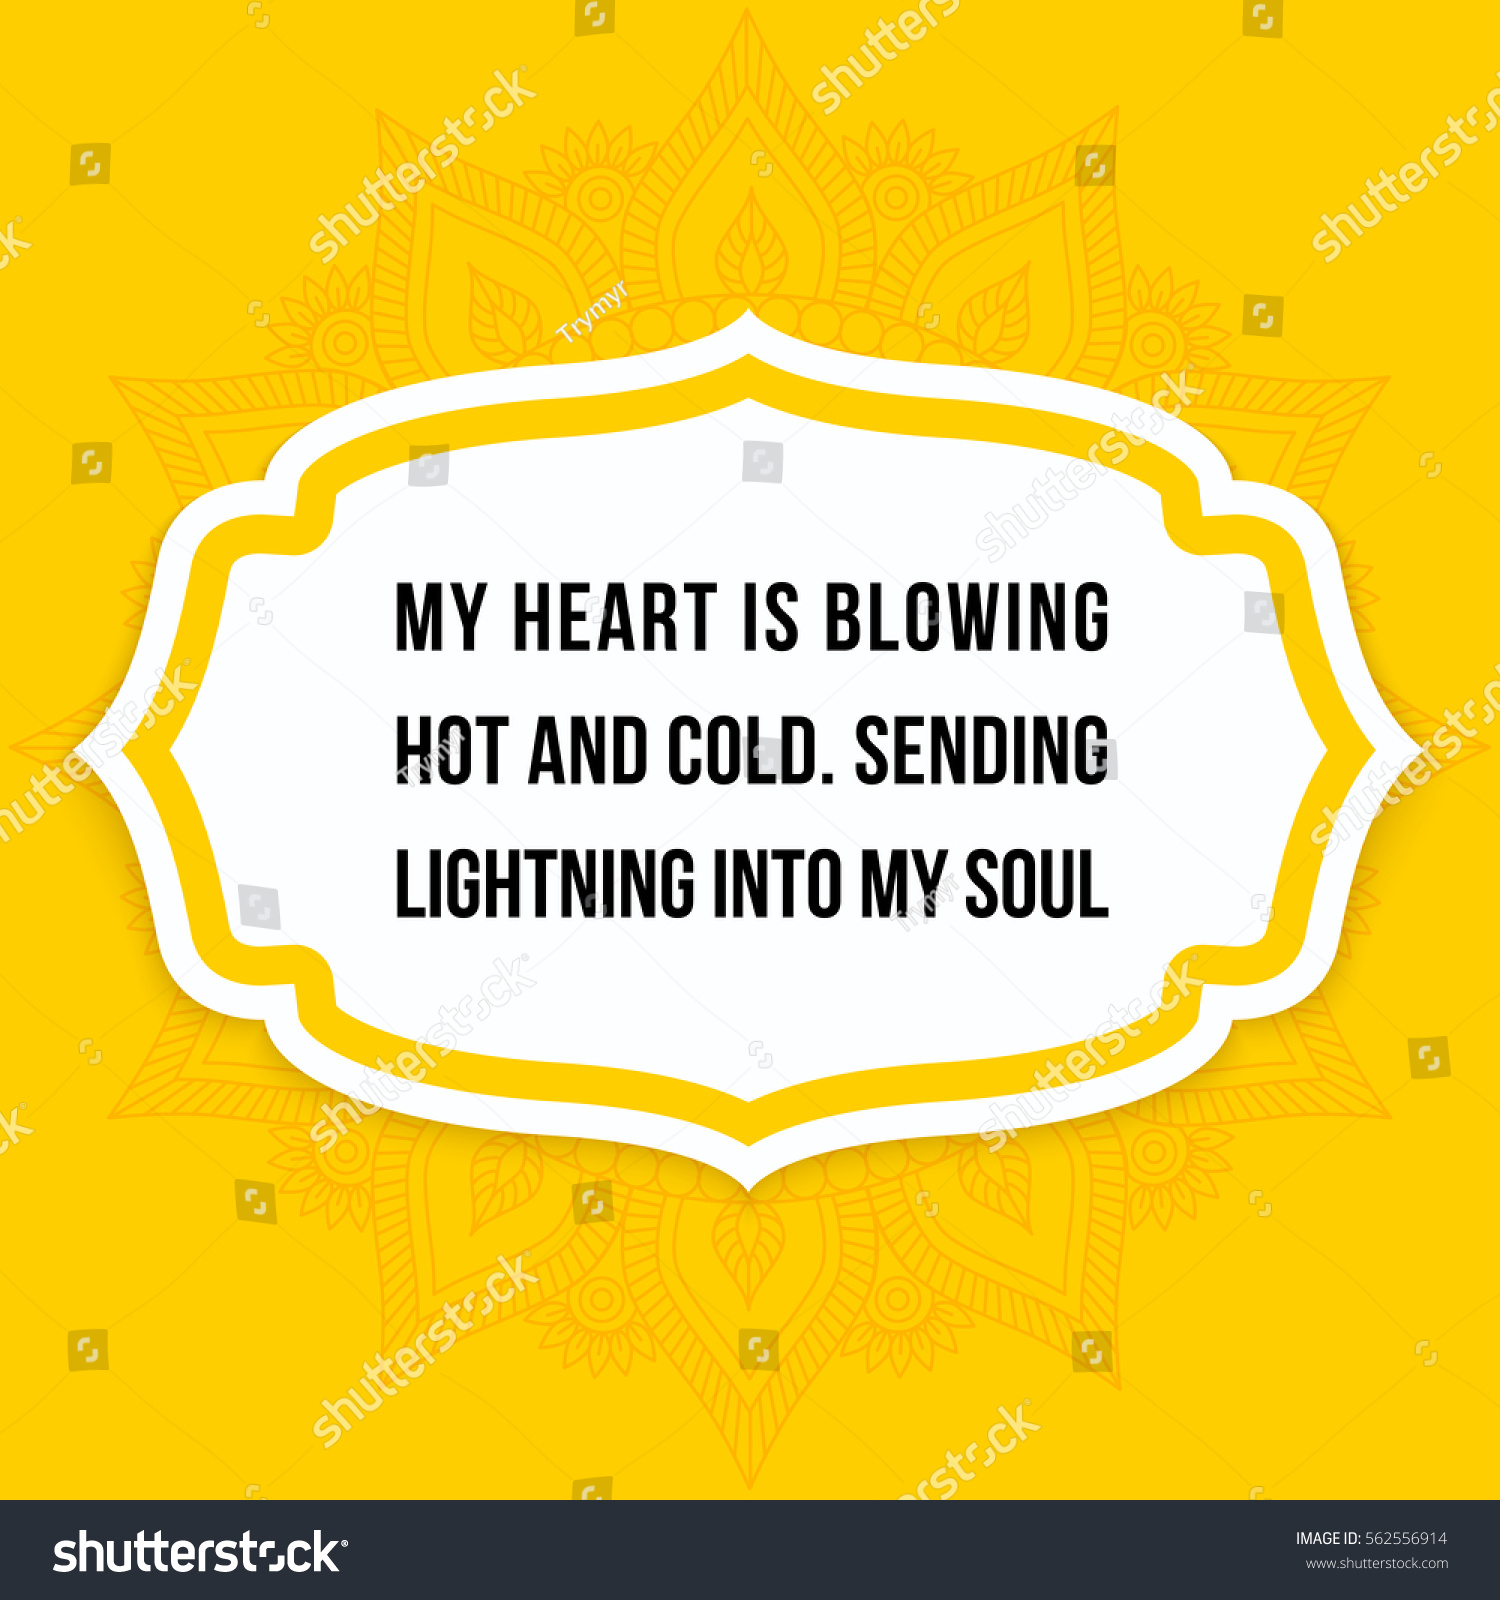 Is blowing and hot cold why he 7 Reasons